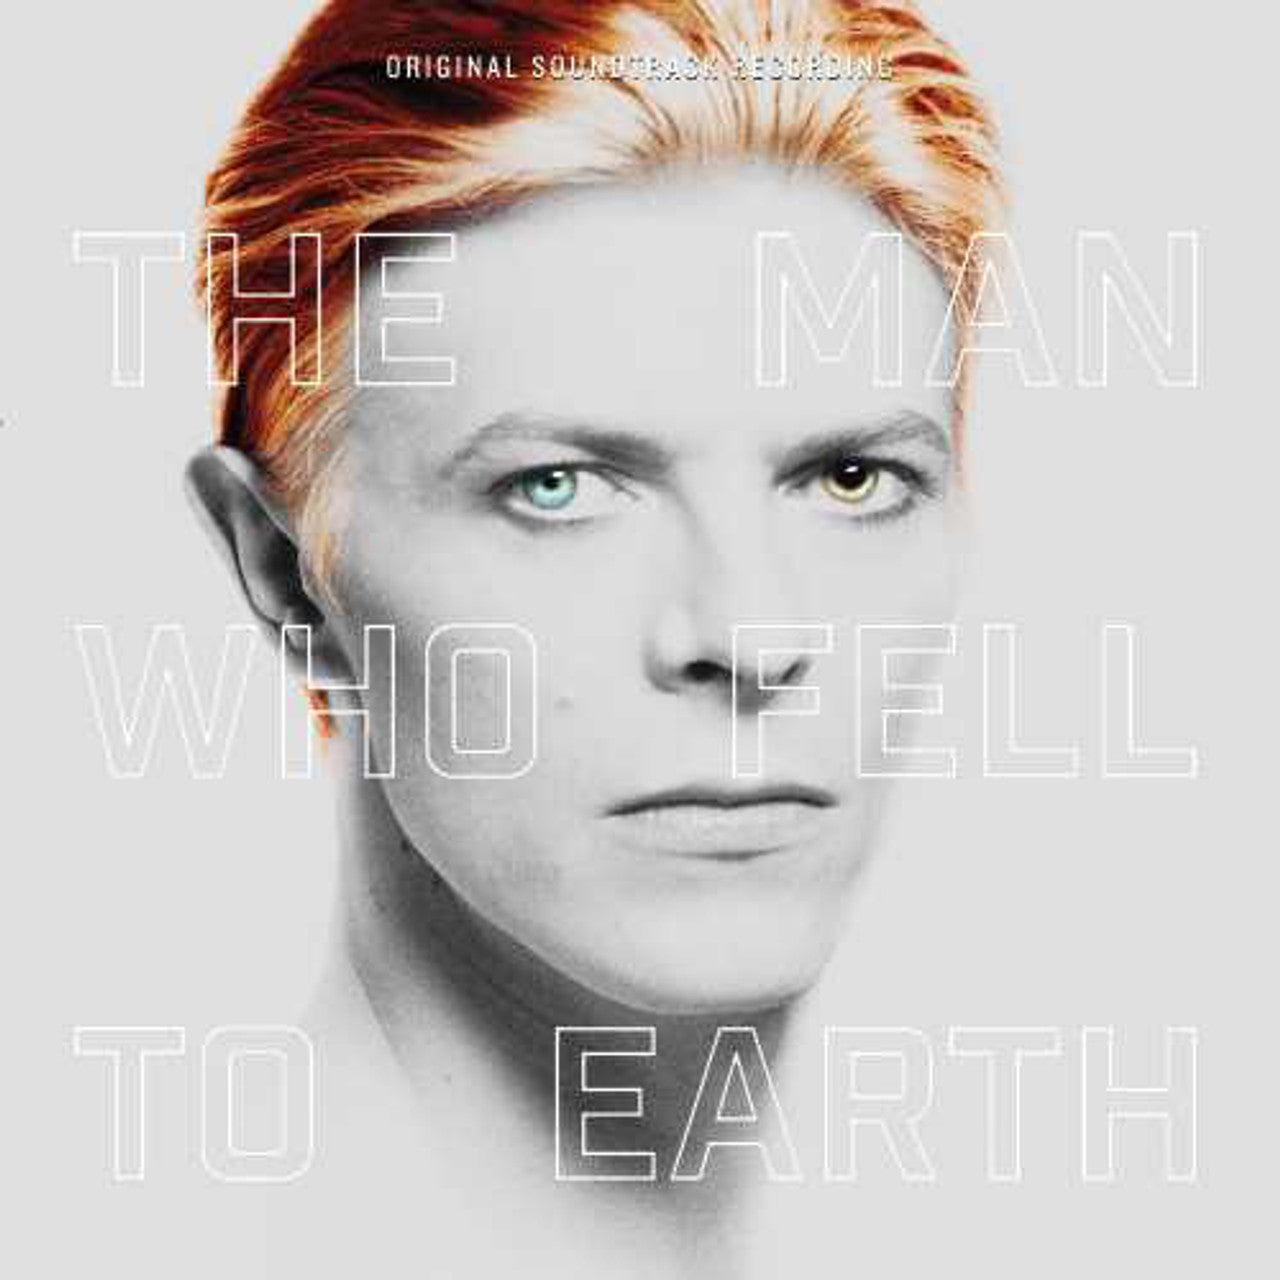 [DAMAGED] Various - The Man Who Fell To Earth